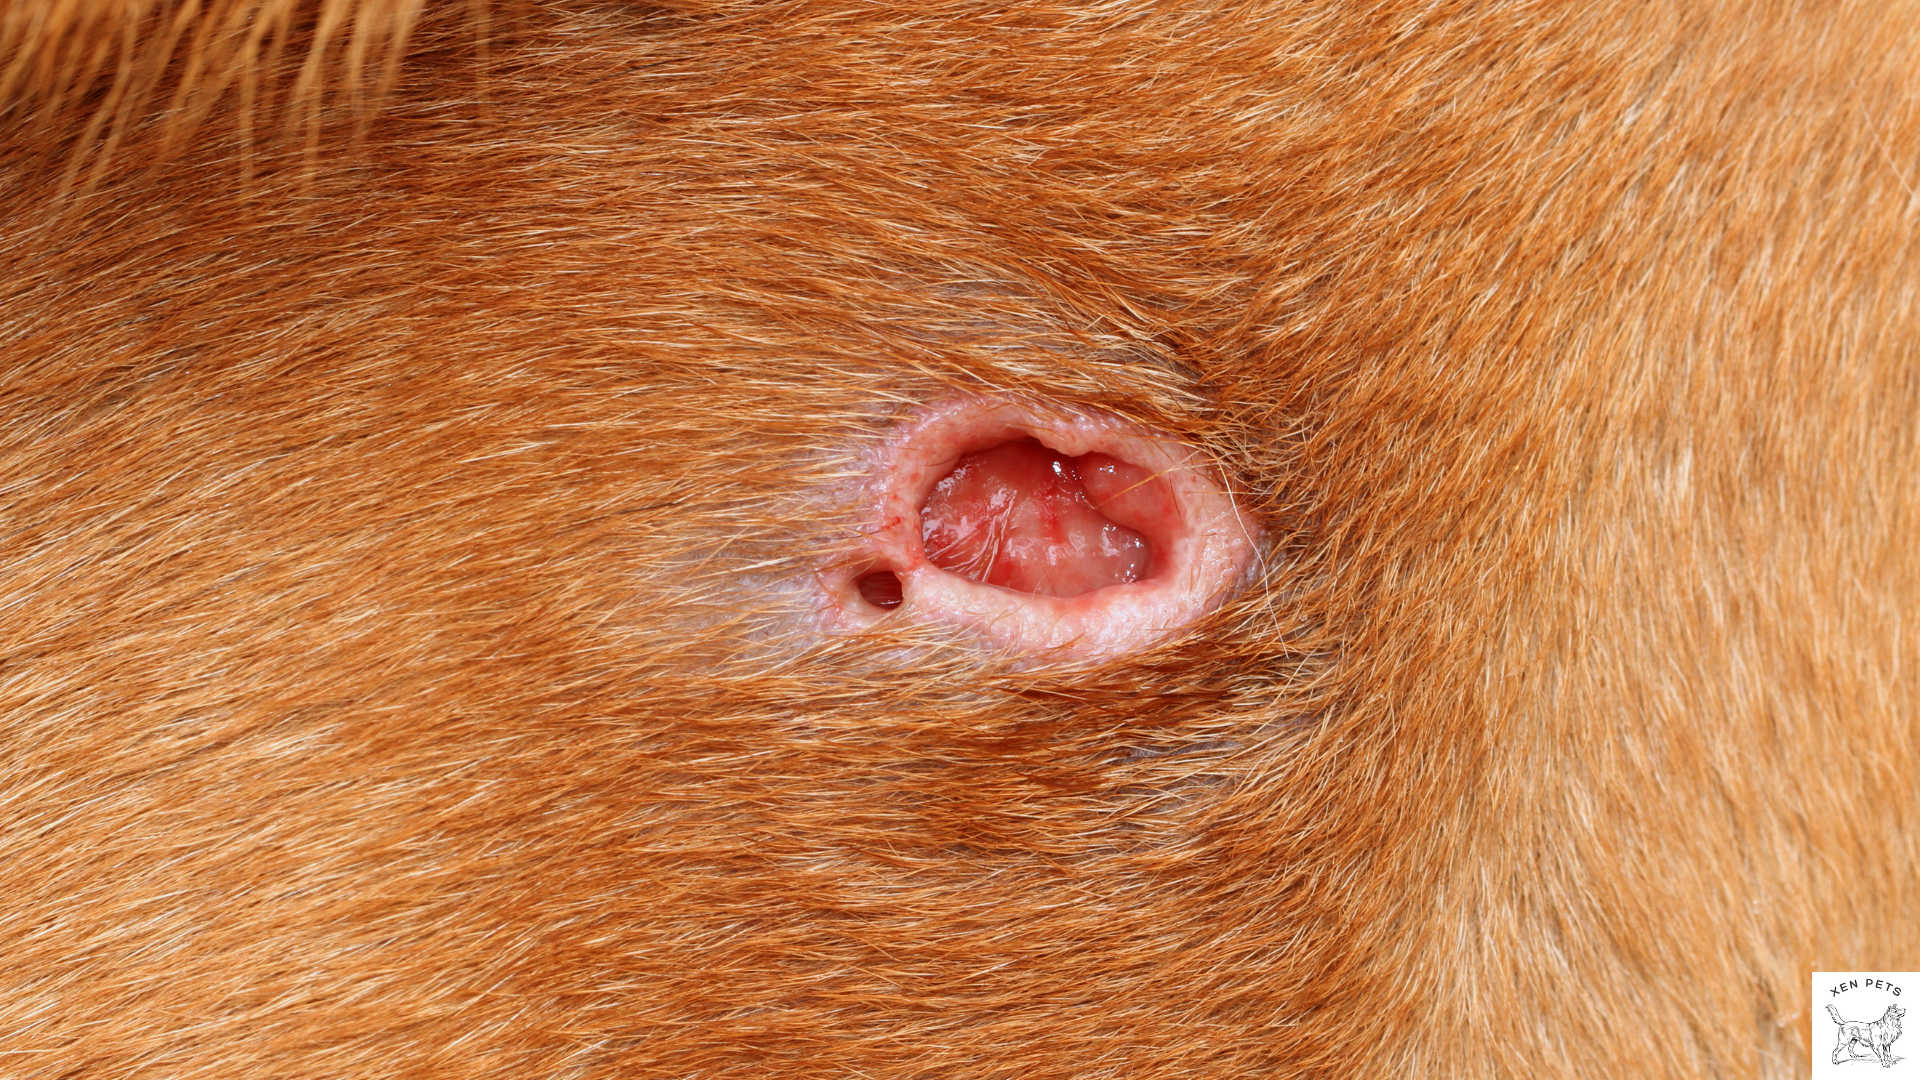 reoccurring wounds are a sign of zinc deficiency in dogs